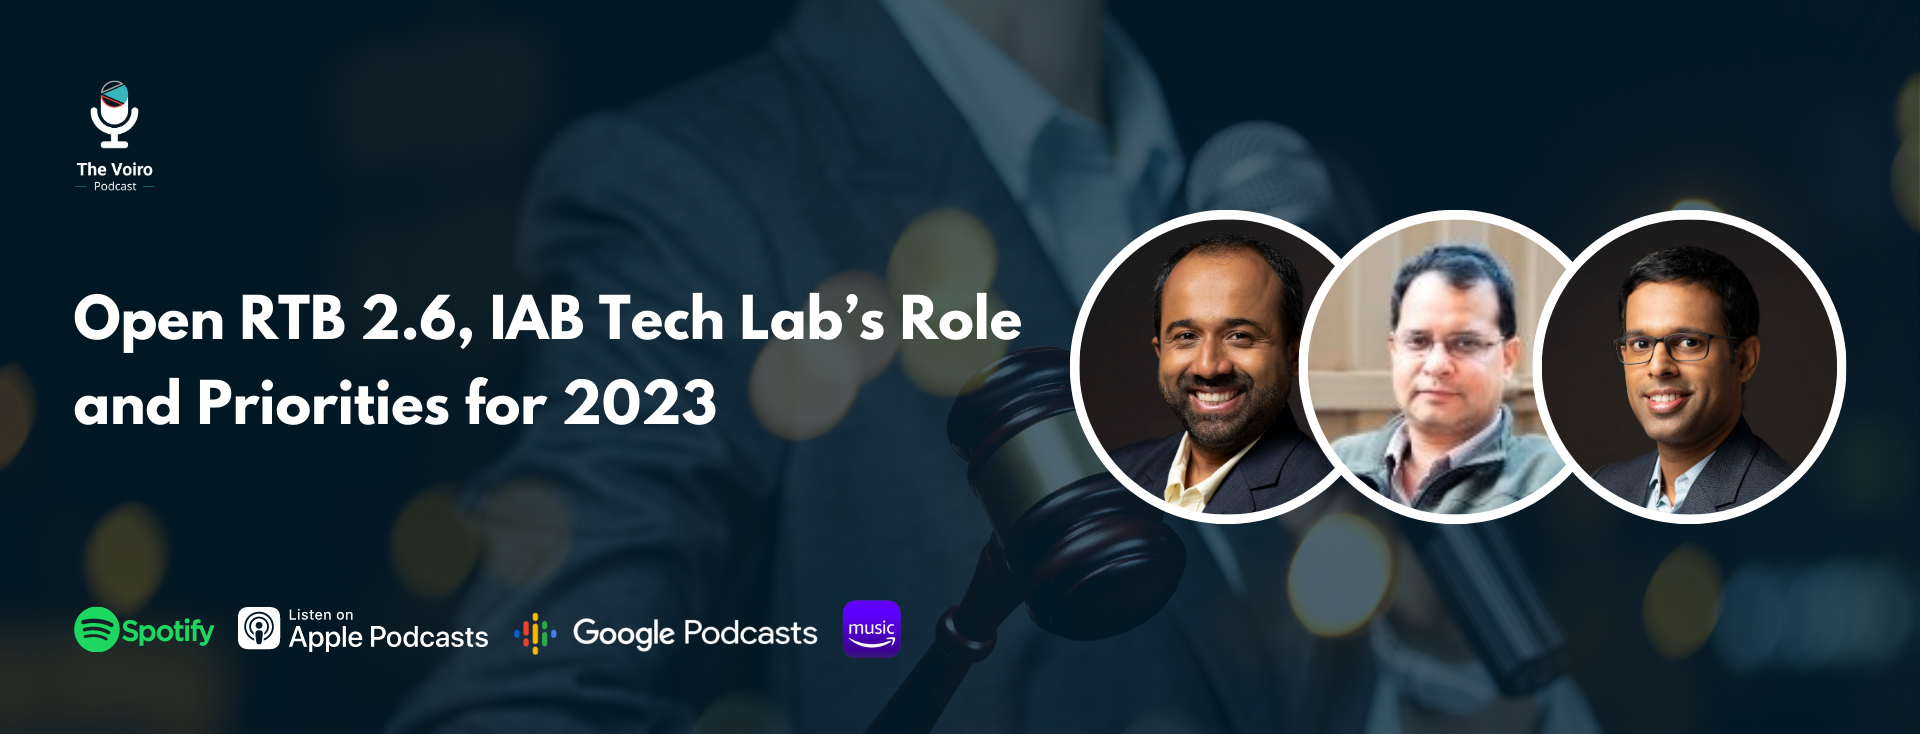 Open RTB 2.6, IAB Tech Lab’s Role and Priorities for 2023